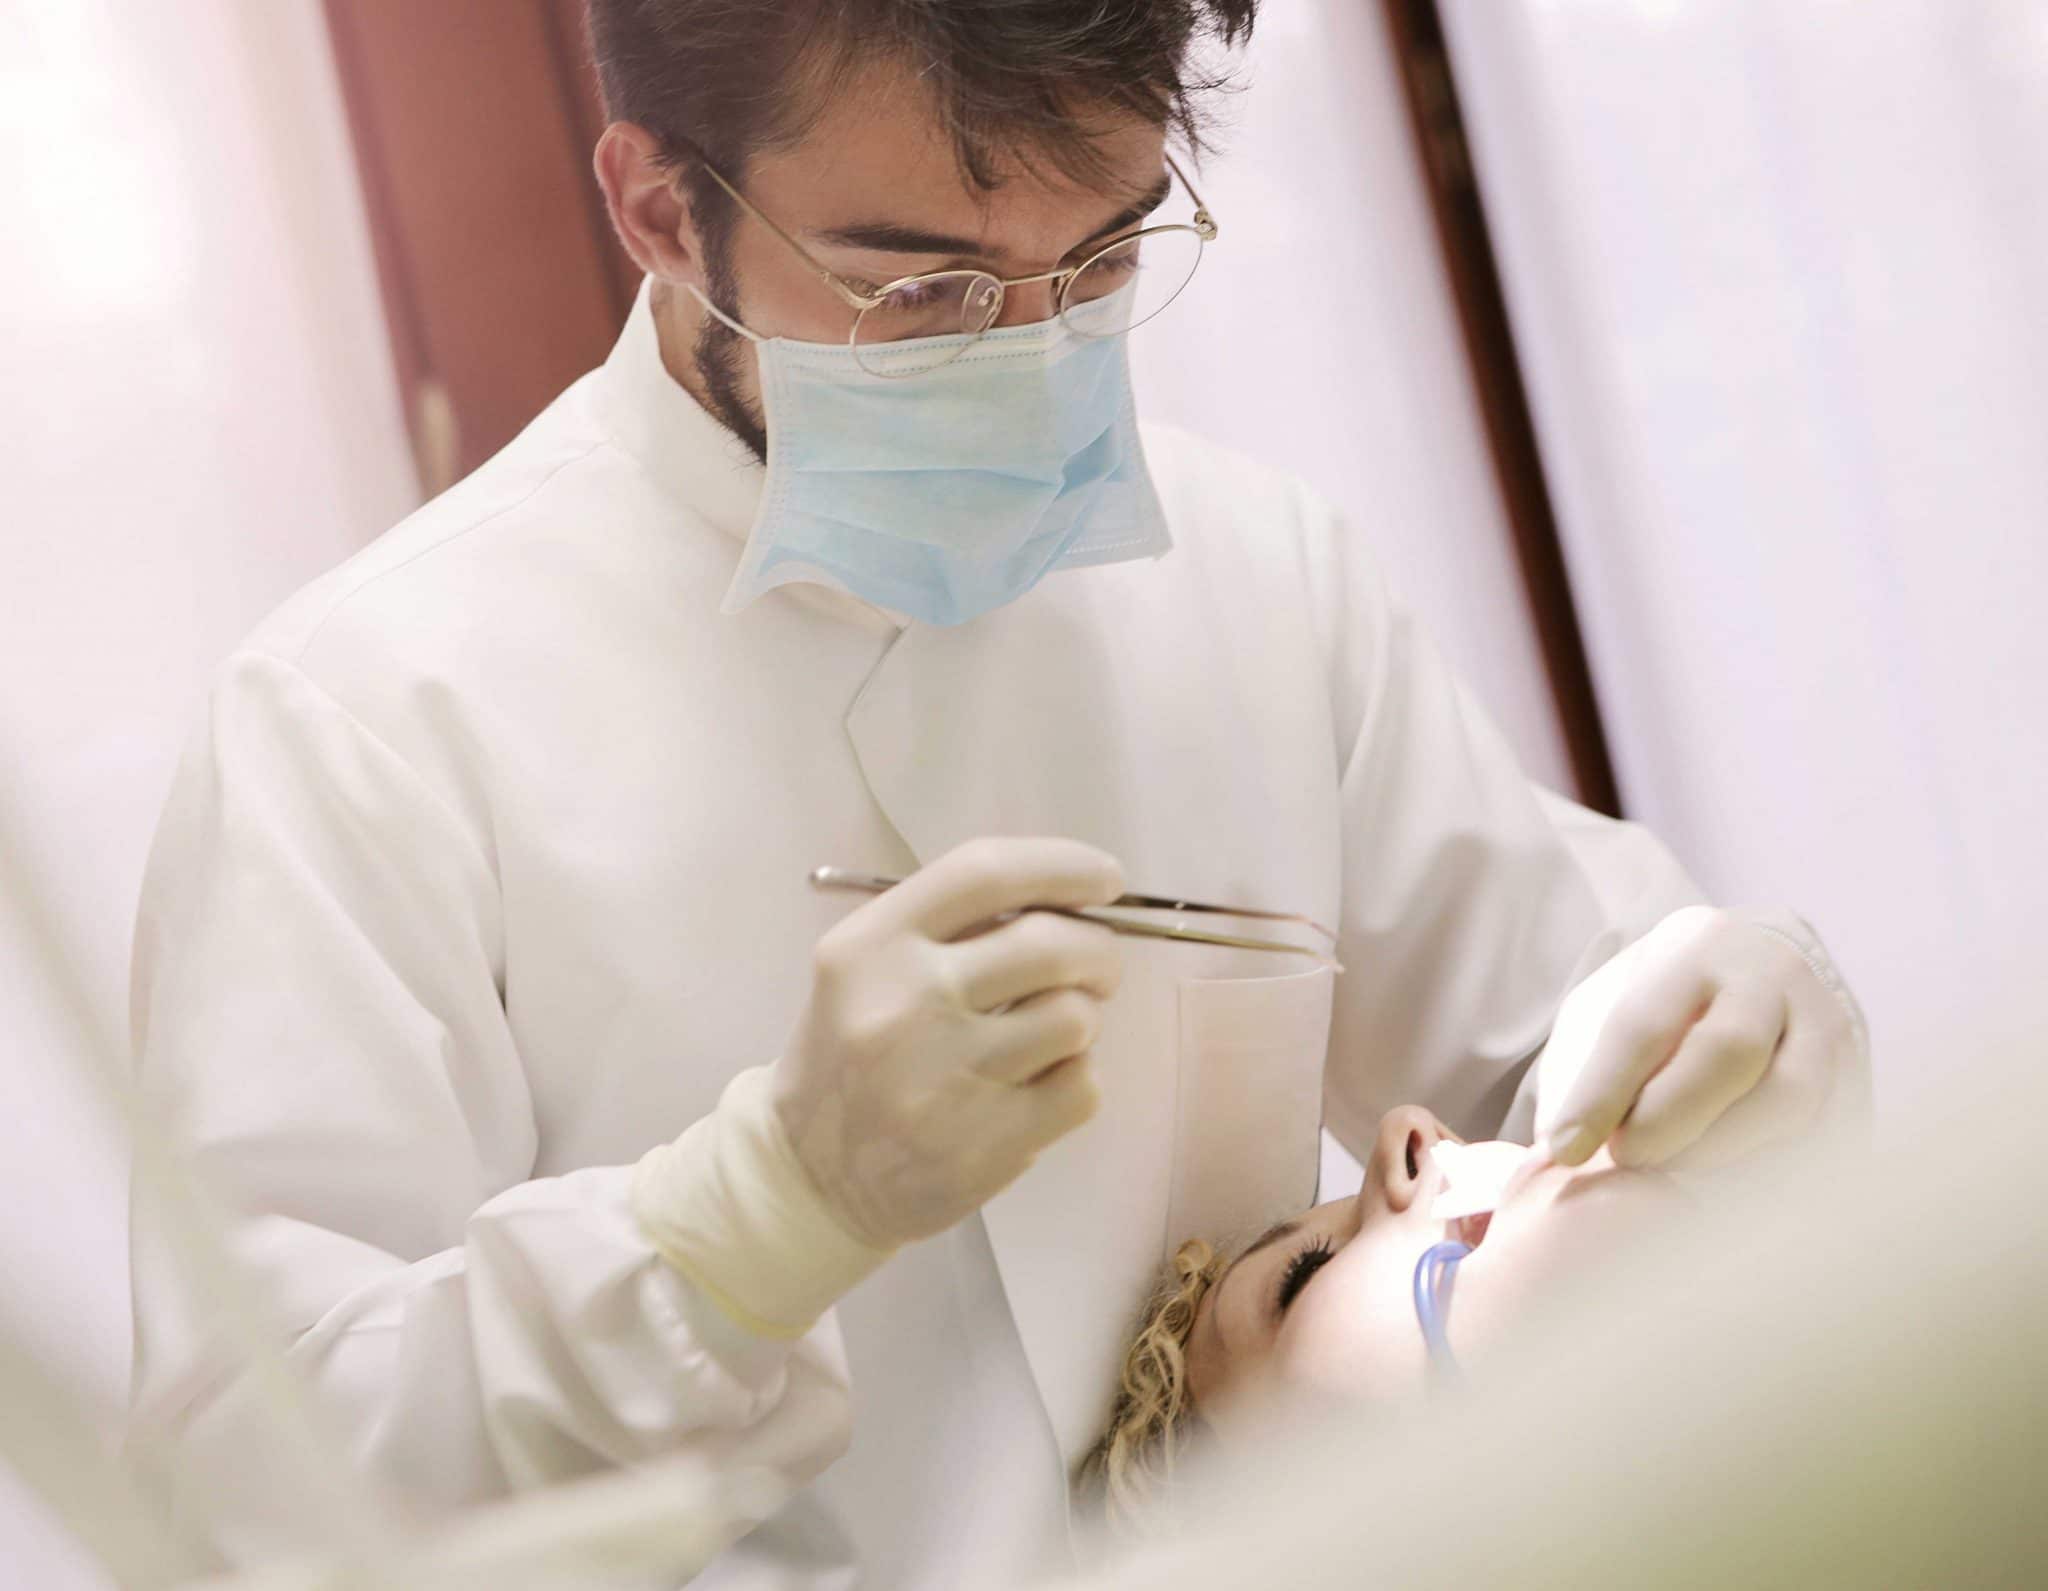 Lying dentist profit from unnecessary procedures